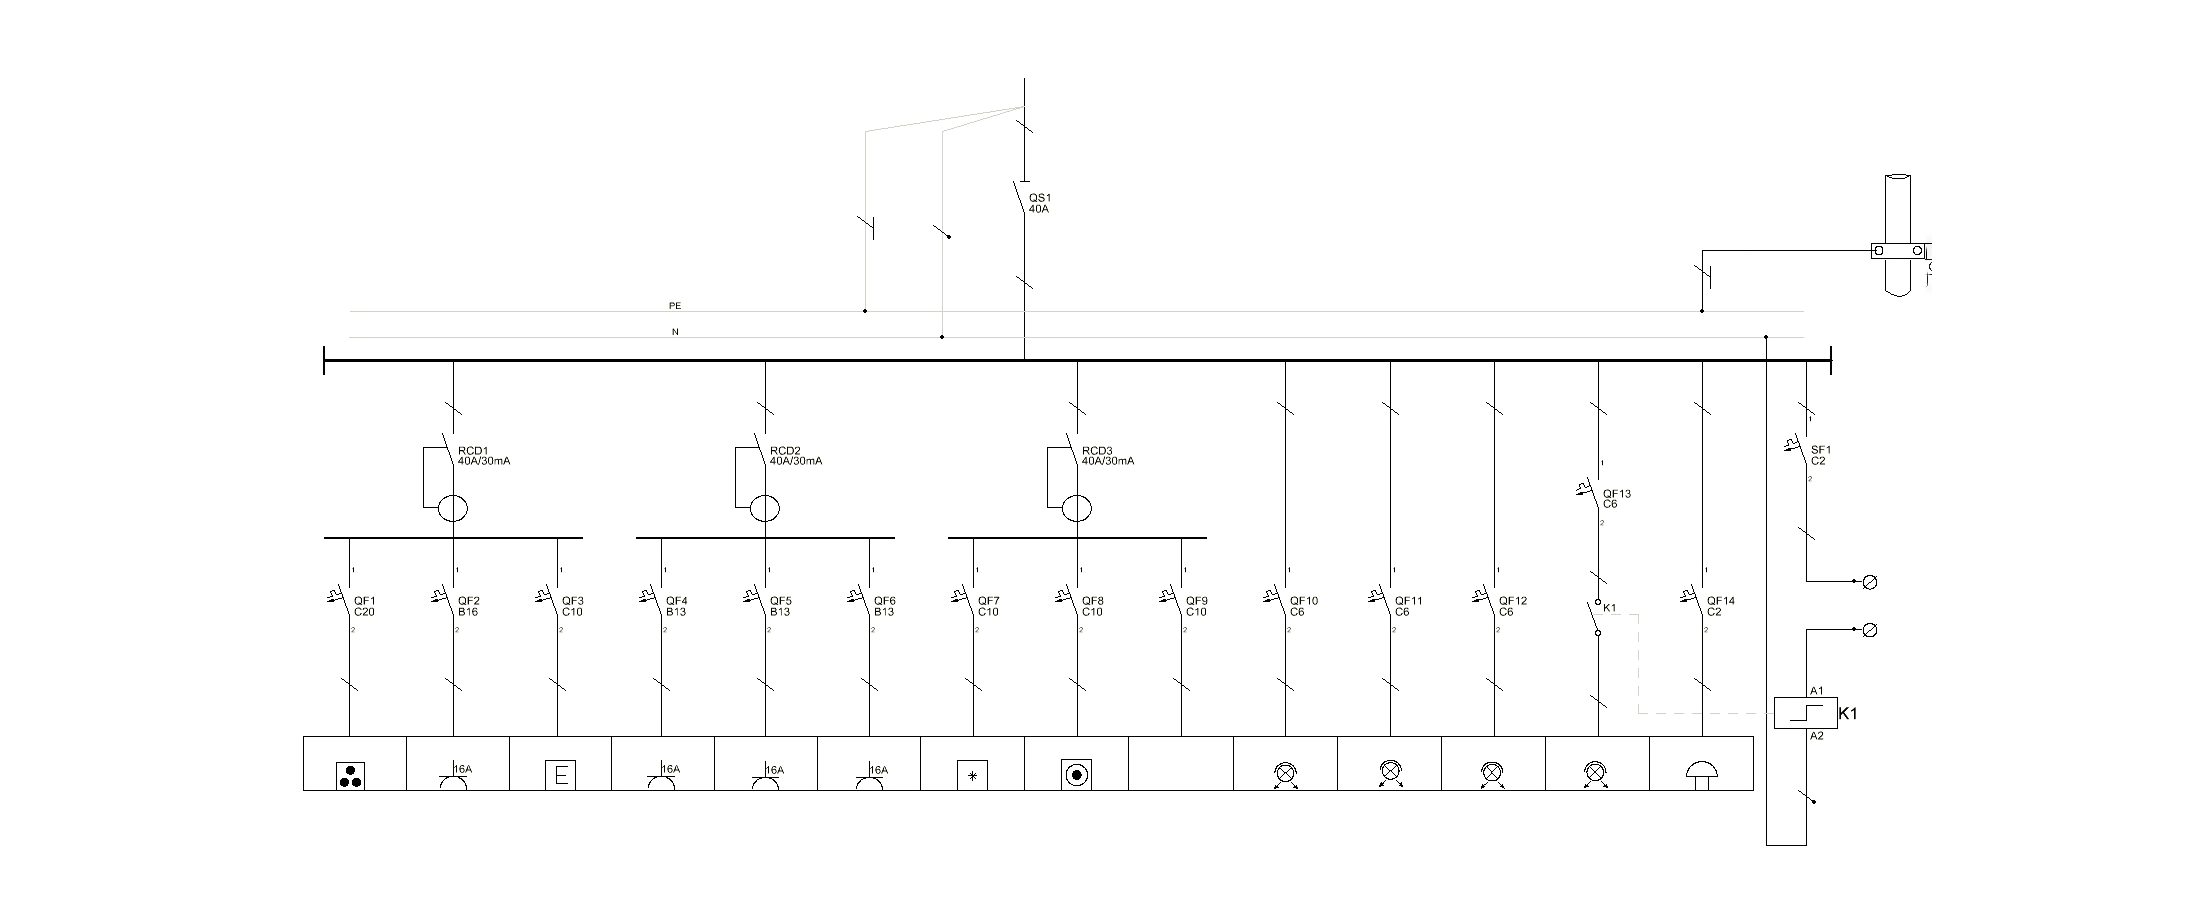 Single Line Diagram For House Wiring 1